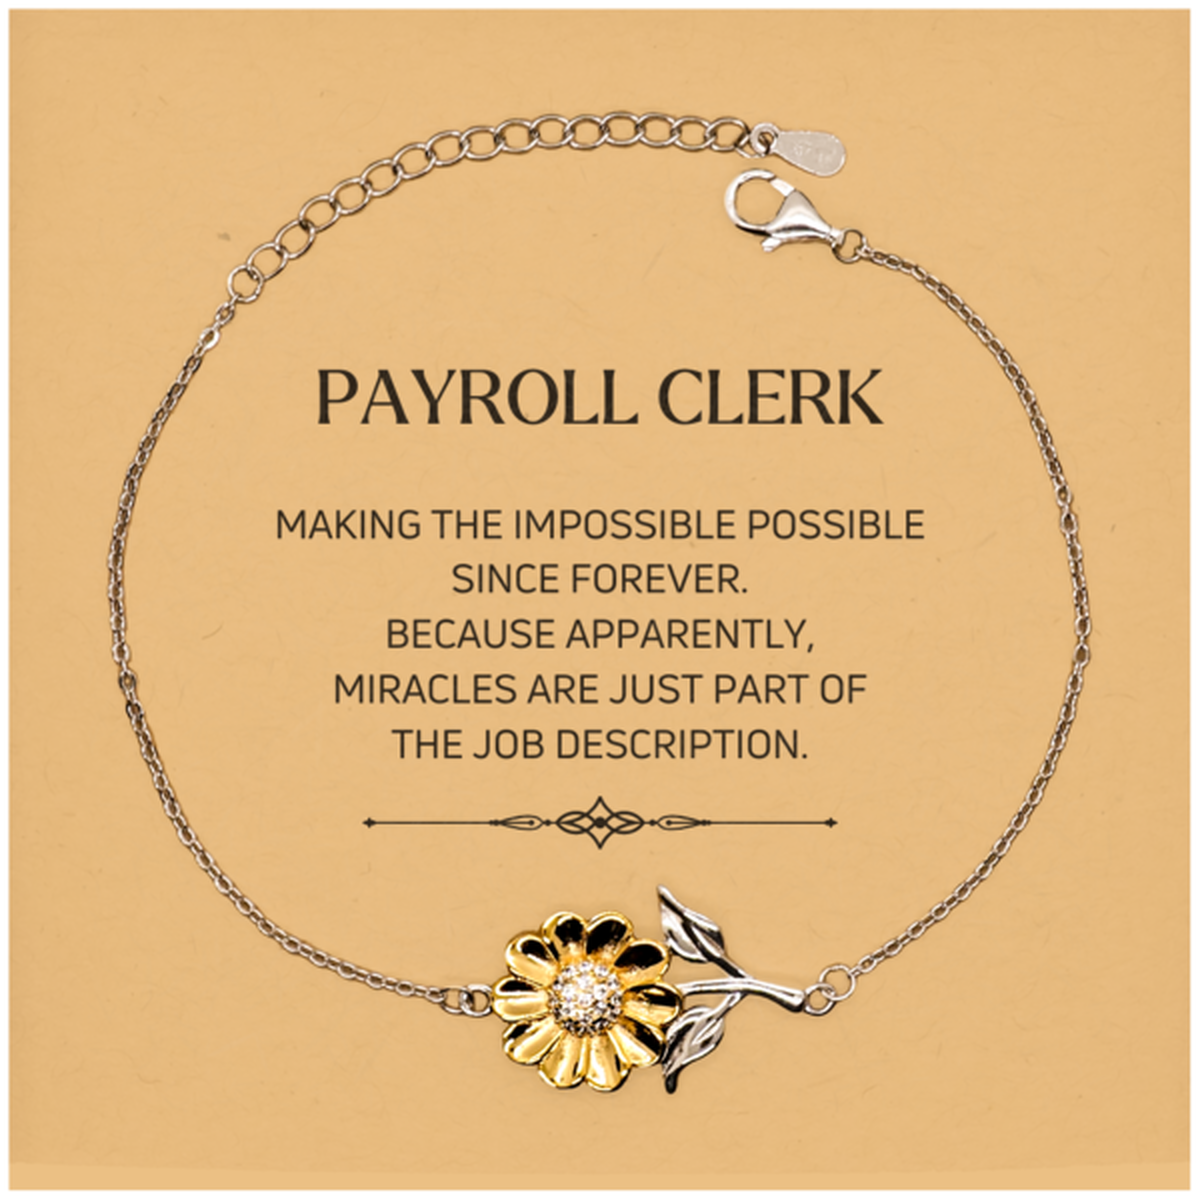 Funny Payroll Clerk Gifts, Miracles are just part of the job description, Inspirational Birthday Christmas Sunflower Bracelet For Payroll Clerk, Men, Women, Coworkers, Friends, Boss